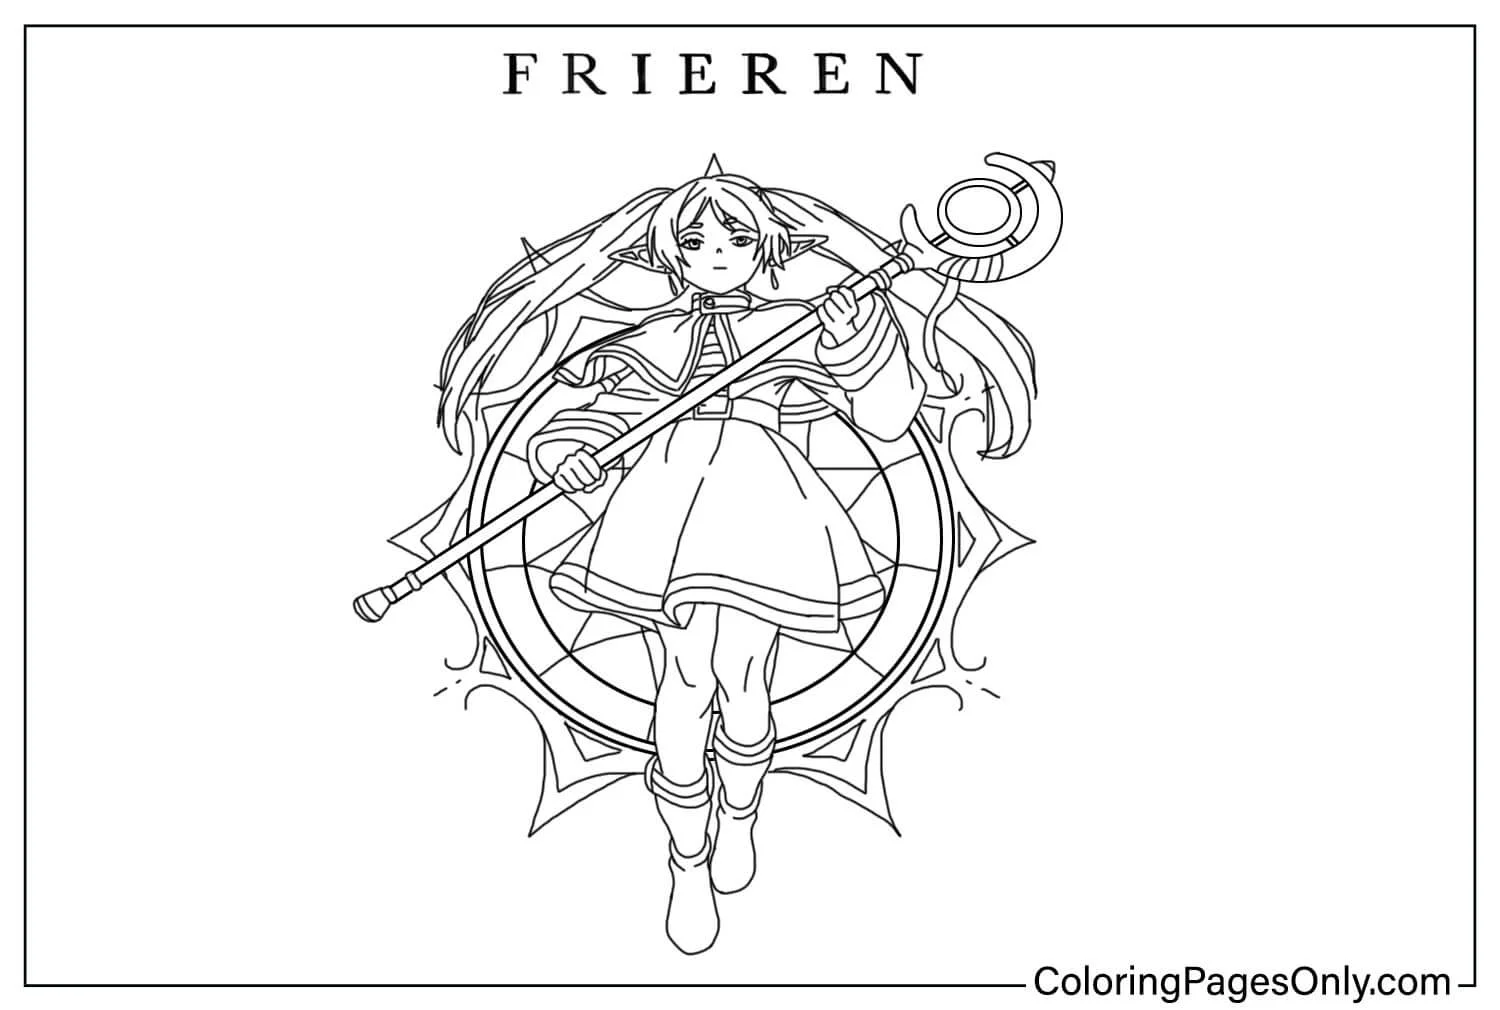 Frieren Coloring Page Free from Frieren: Beyond Journey’s End